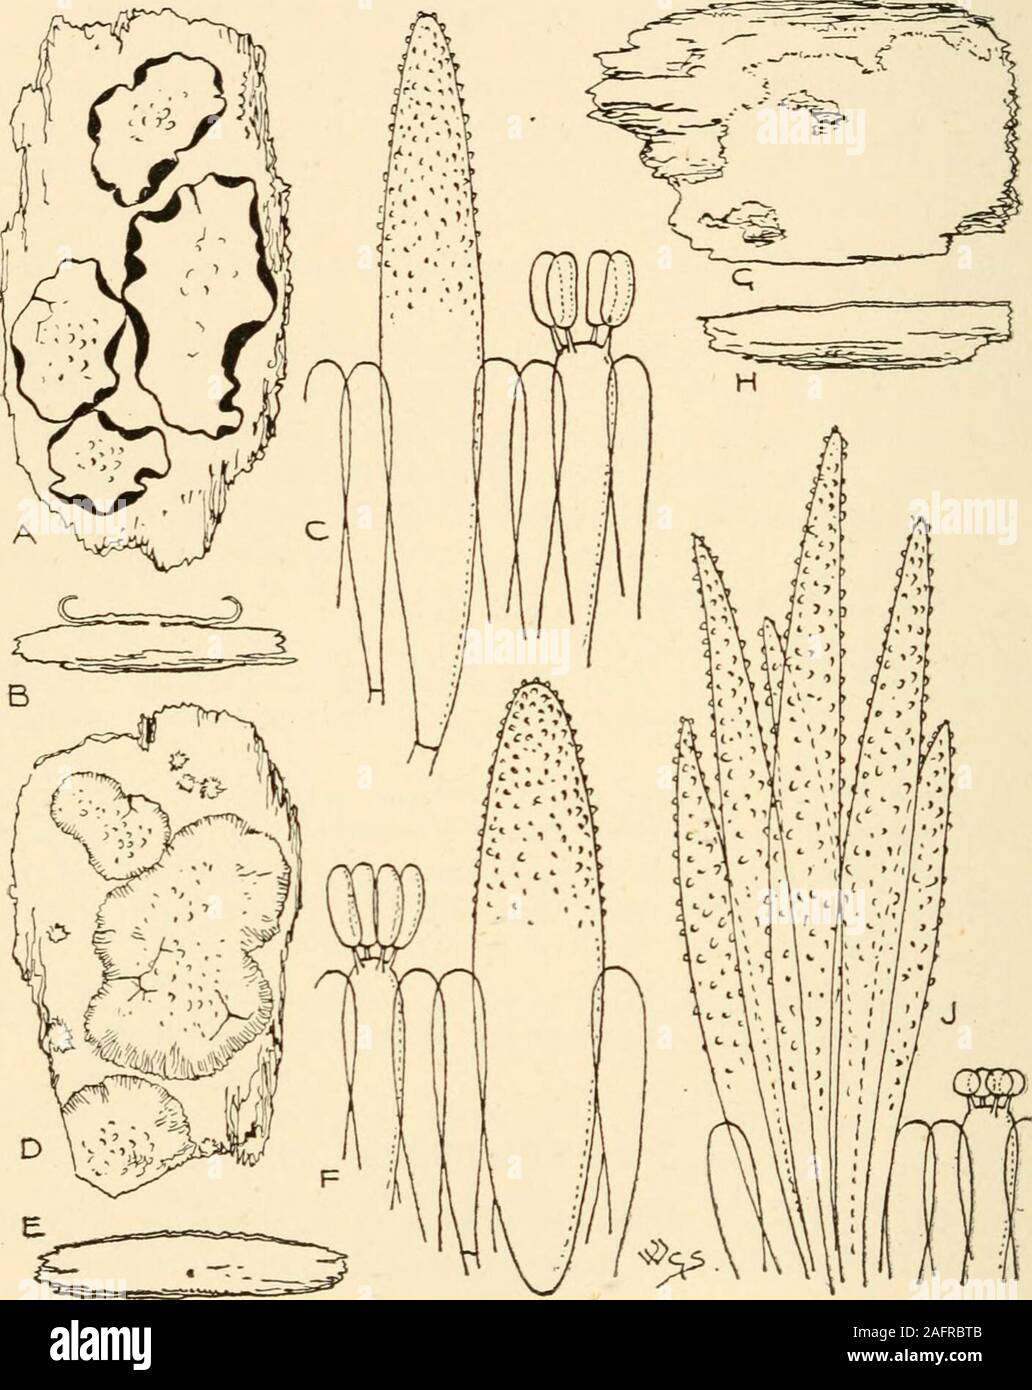 . Synopsis of the British Basidiomycetes ; a descriptive catalogue of the drawings and specimens in the Department of botany, British museum. ound above the bark. LXXXVI. PENIOPHORA Cooke. (From the shuttle-like setae, metuloides, or modified cystidia borneon the hymenium ; Gr. penion, a shuttle,phero^ to bear.) Resupinate, effused, coriaceous or subcarnose. Hymenium, asseen under a pocket lens, setulose, cystidia projecting, fusiform,colourless, hyaline at first smooth then verruculose above withminute particles of oxalate of lime, which are derived from watercontaining this substance in solu Stock Photo